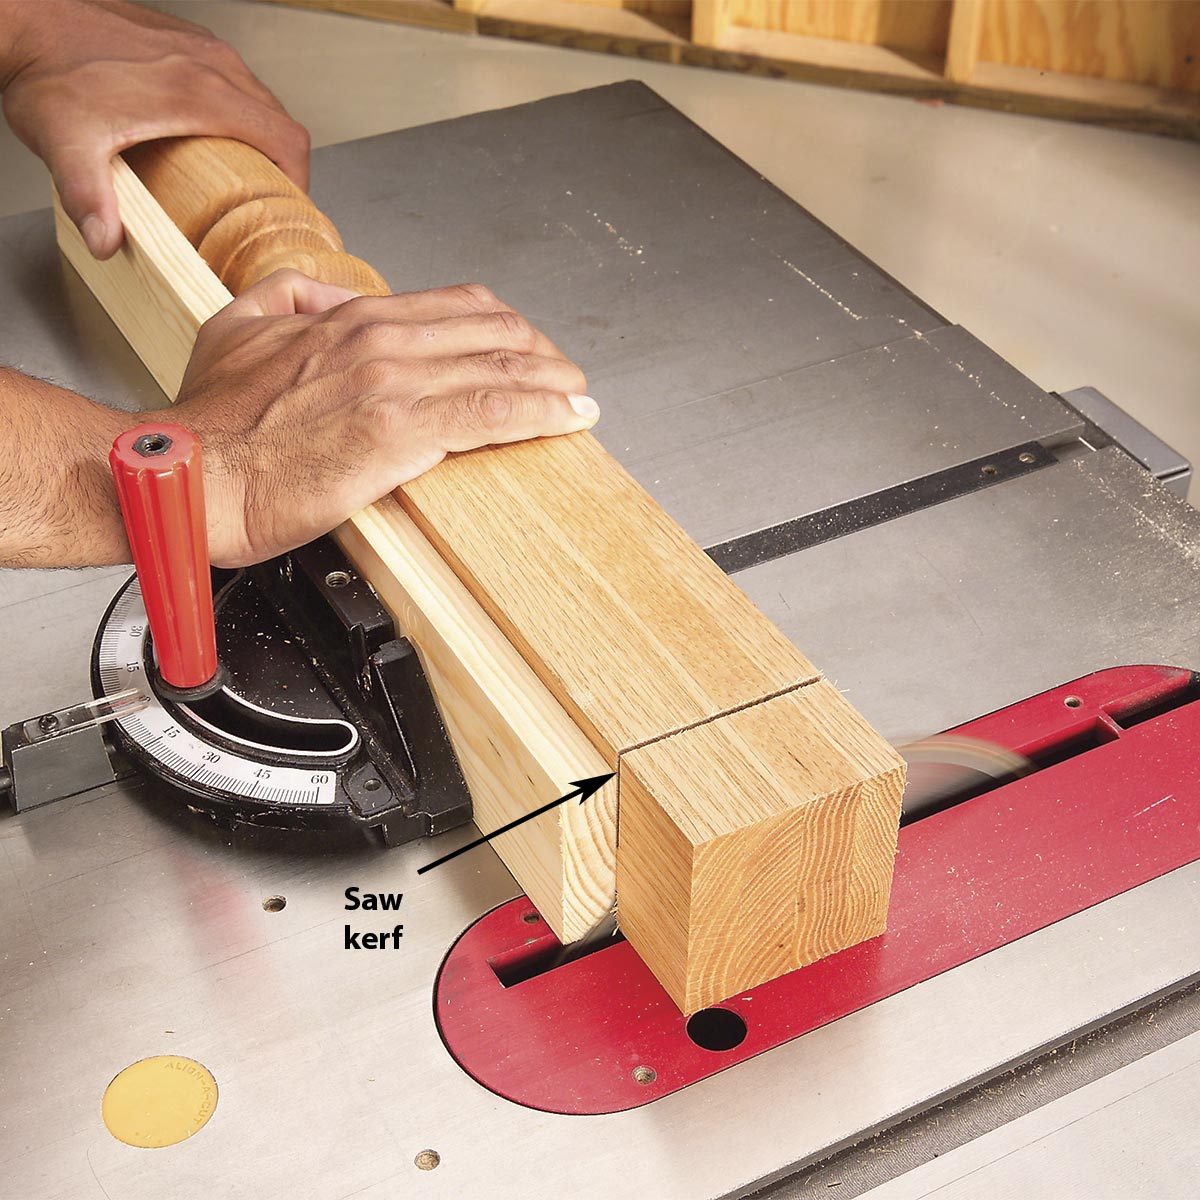 The 10 Most Common Woodworking Mistakes Beginners Make